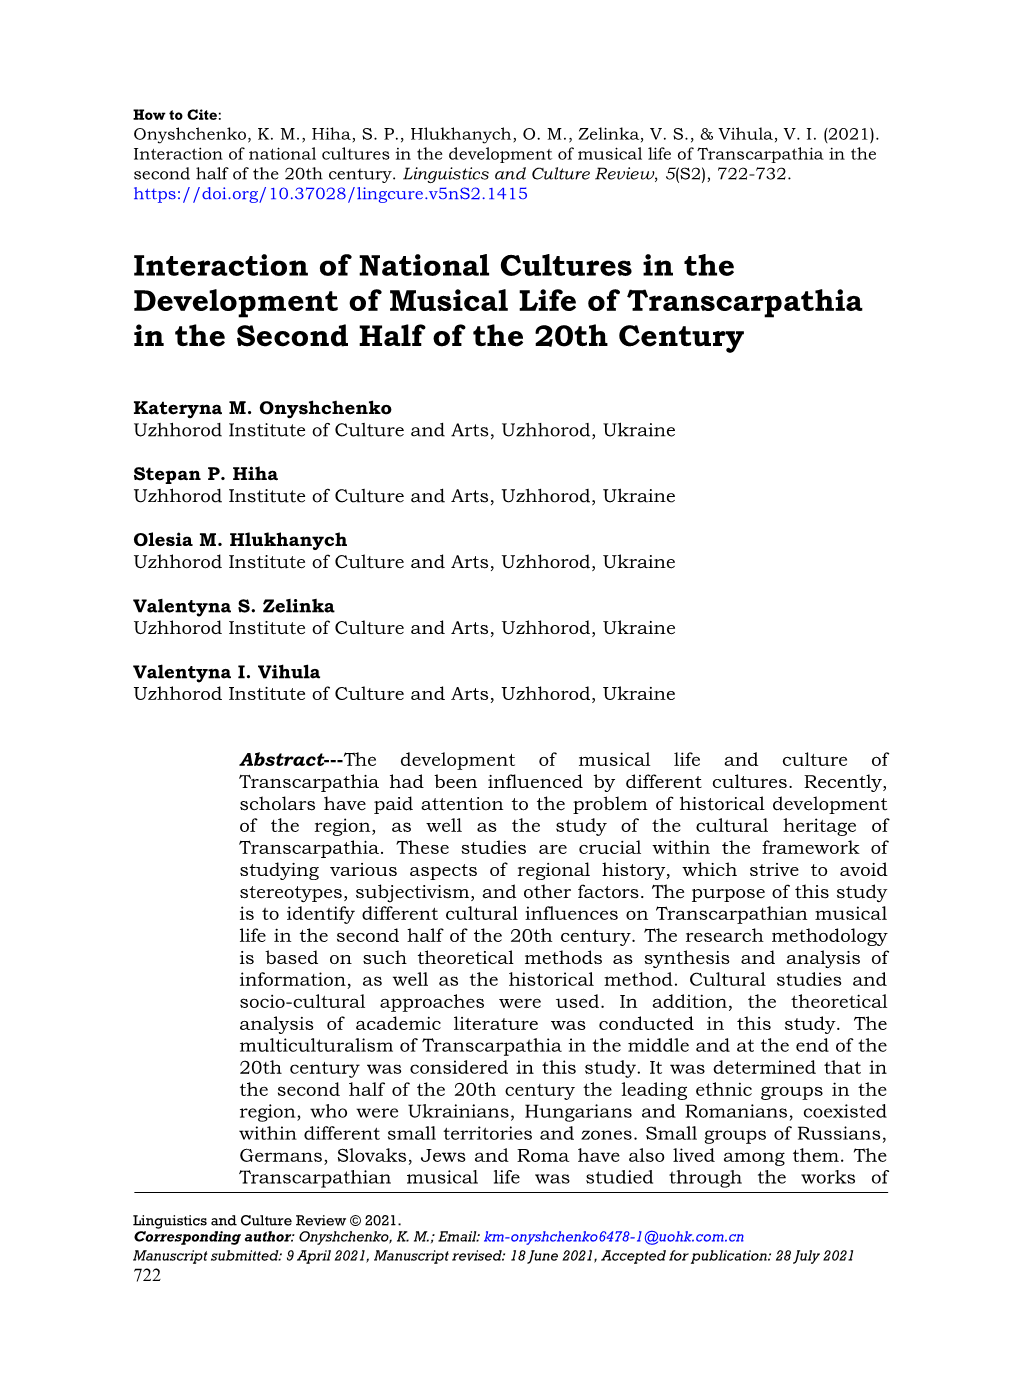 Interaction of National Cultures in the Development of Musical Life of Transcarpathia in the Second Half of the 20Th Century